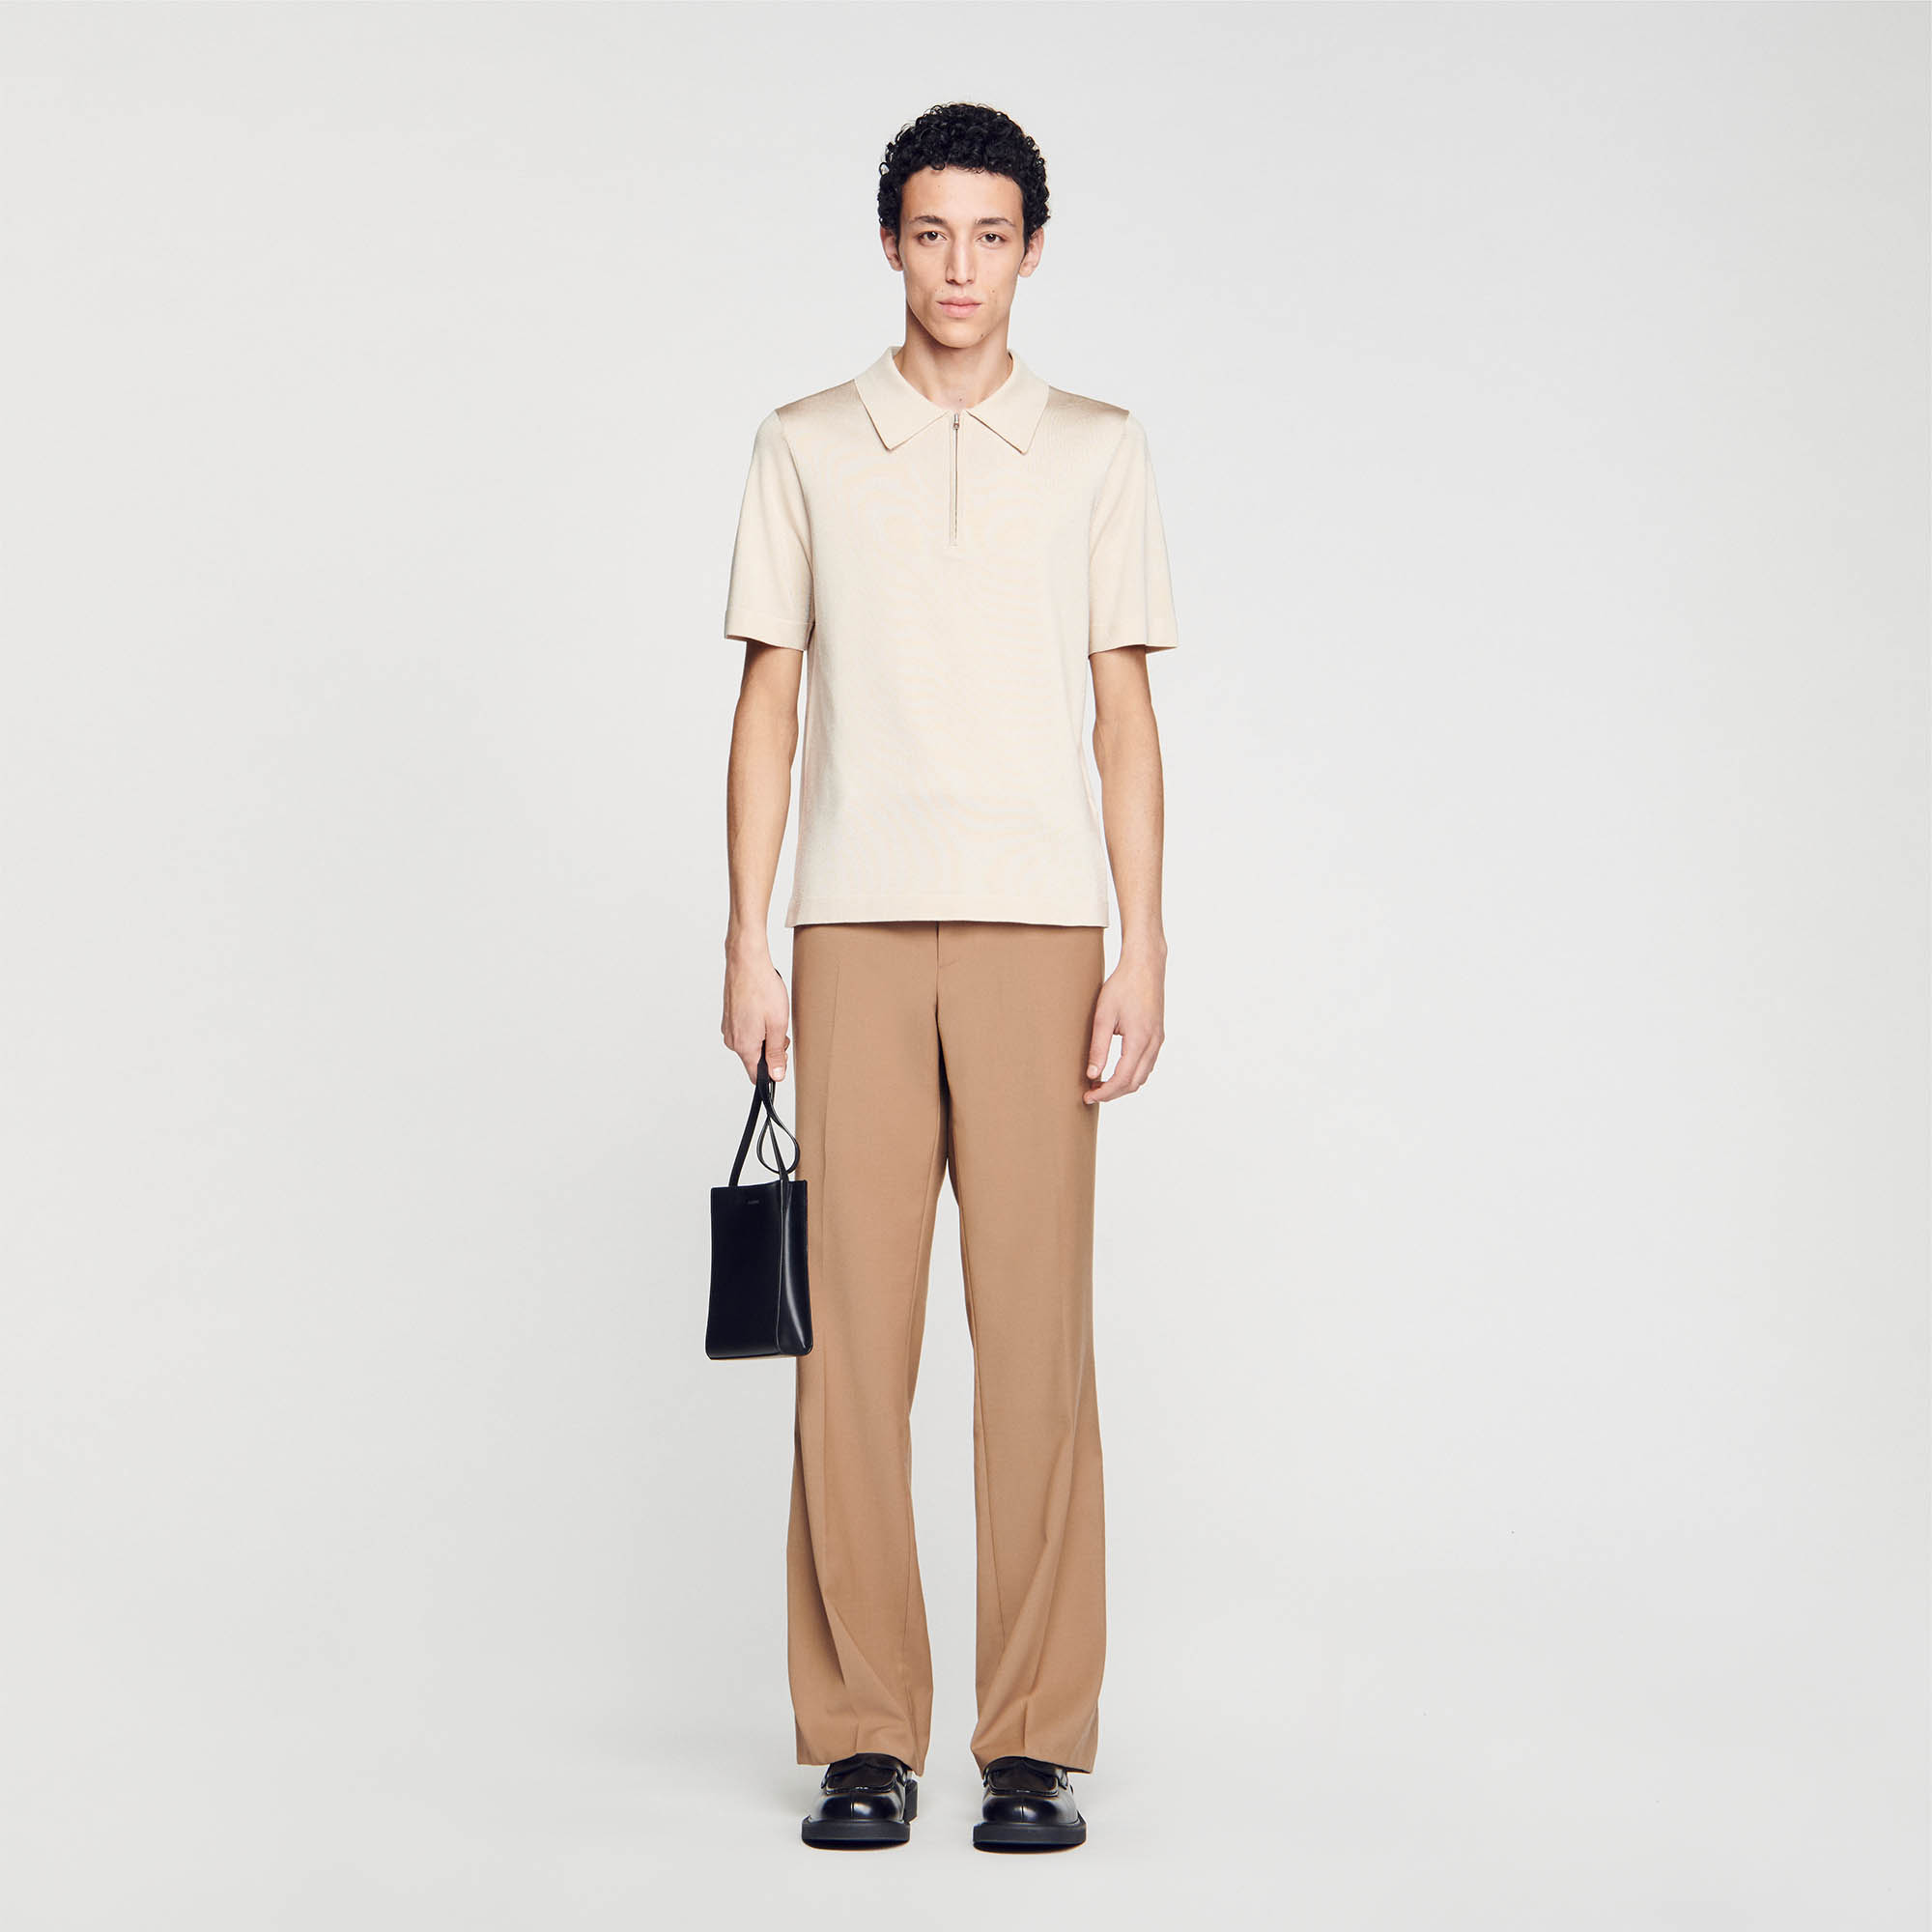 Sandro Knitted polo shirt with a zip-up shirt collar and short sleeves